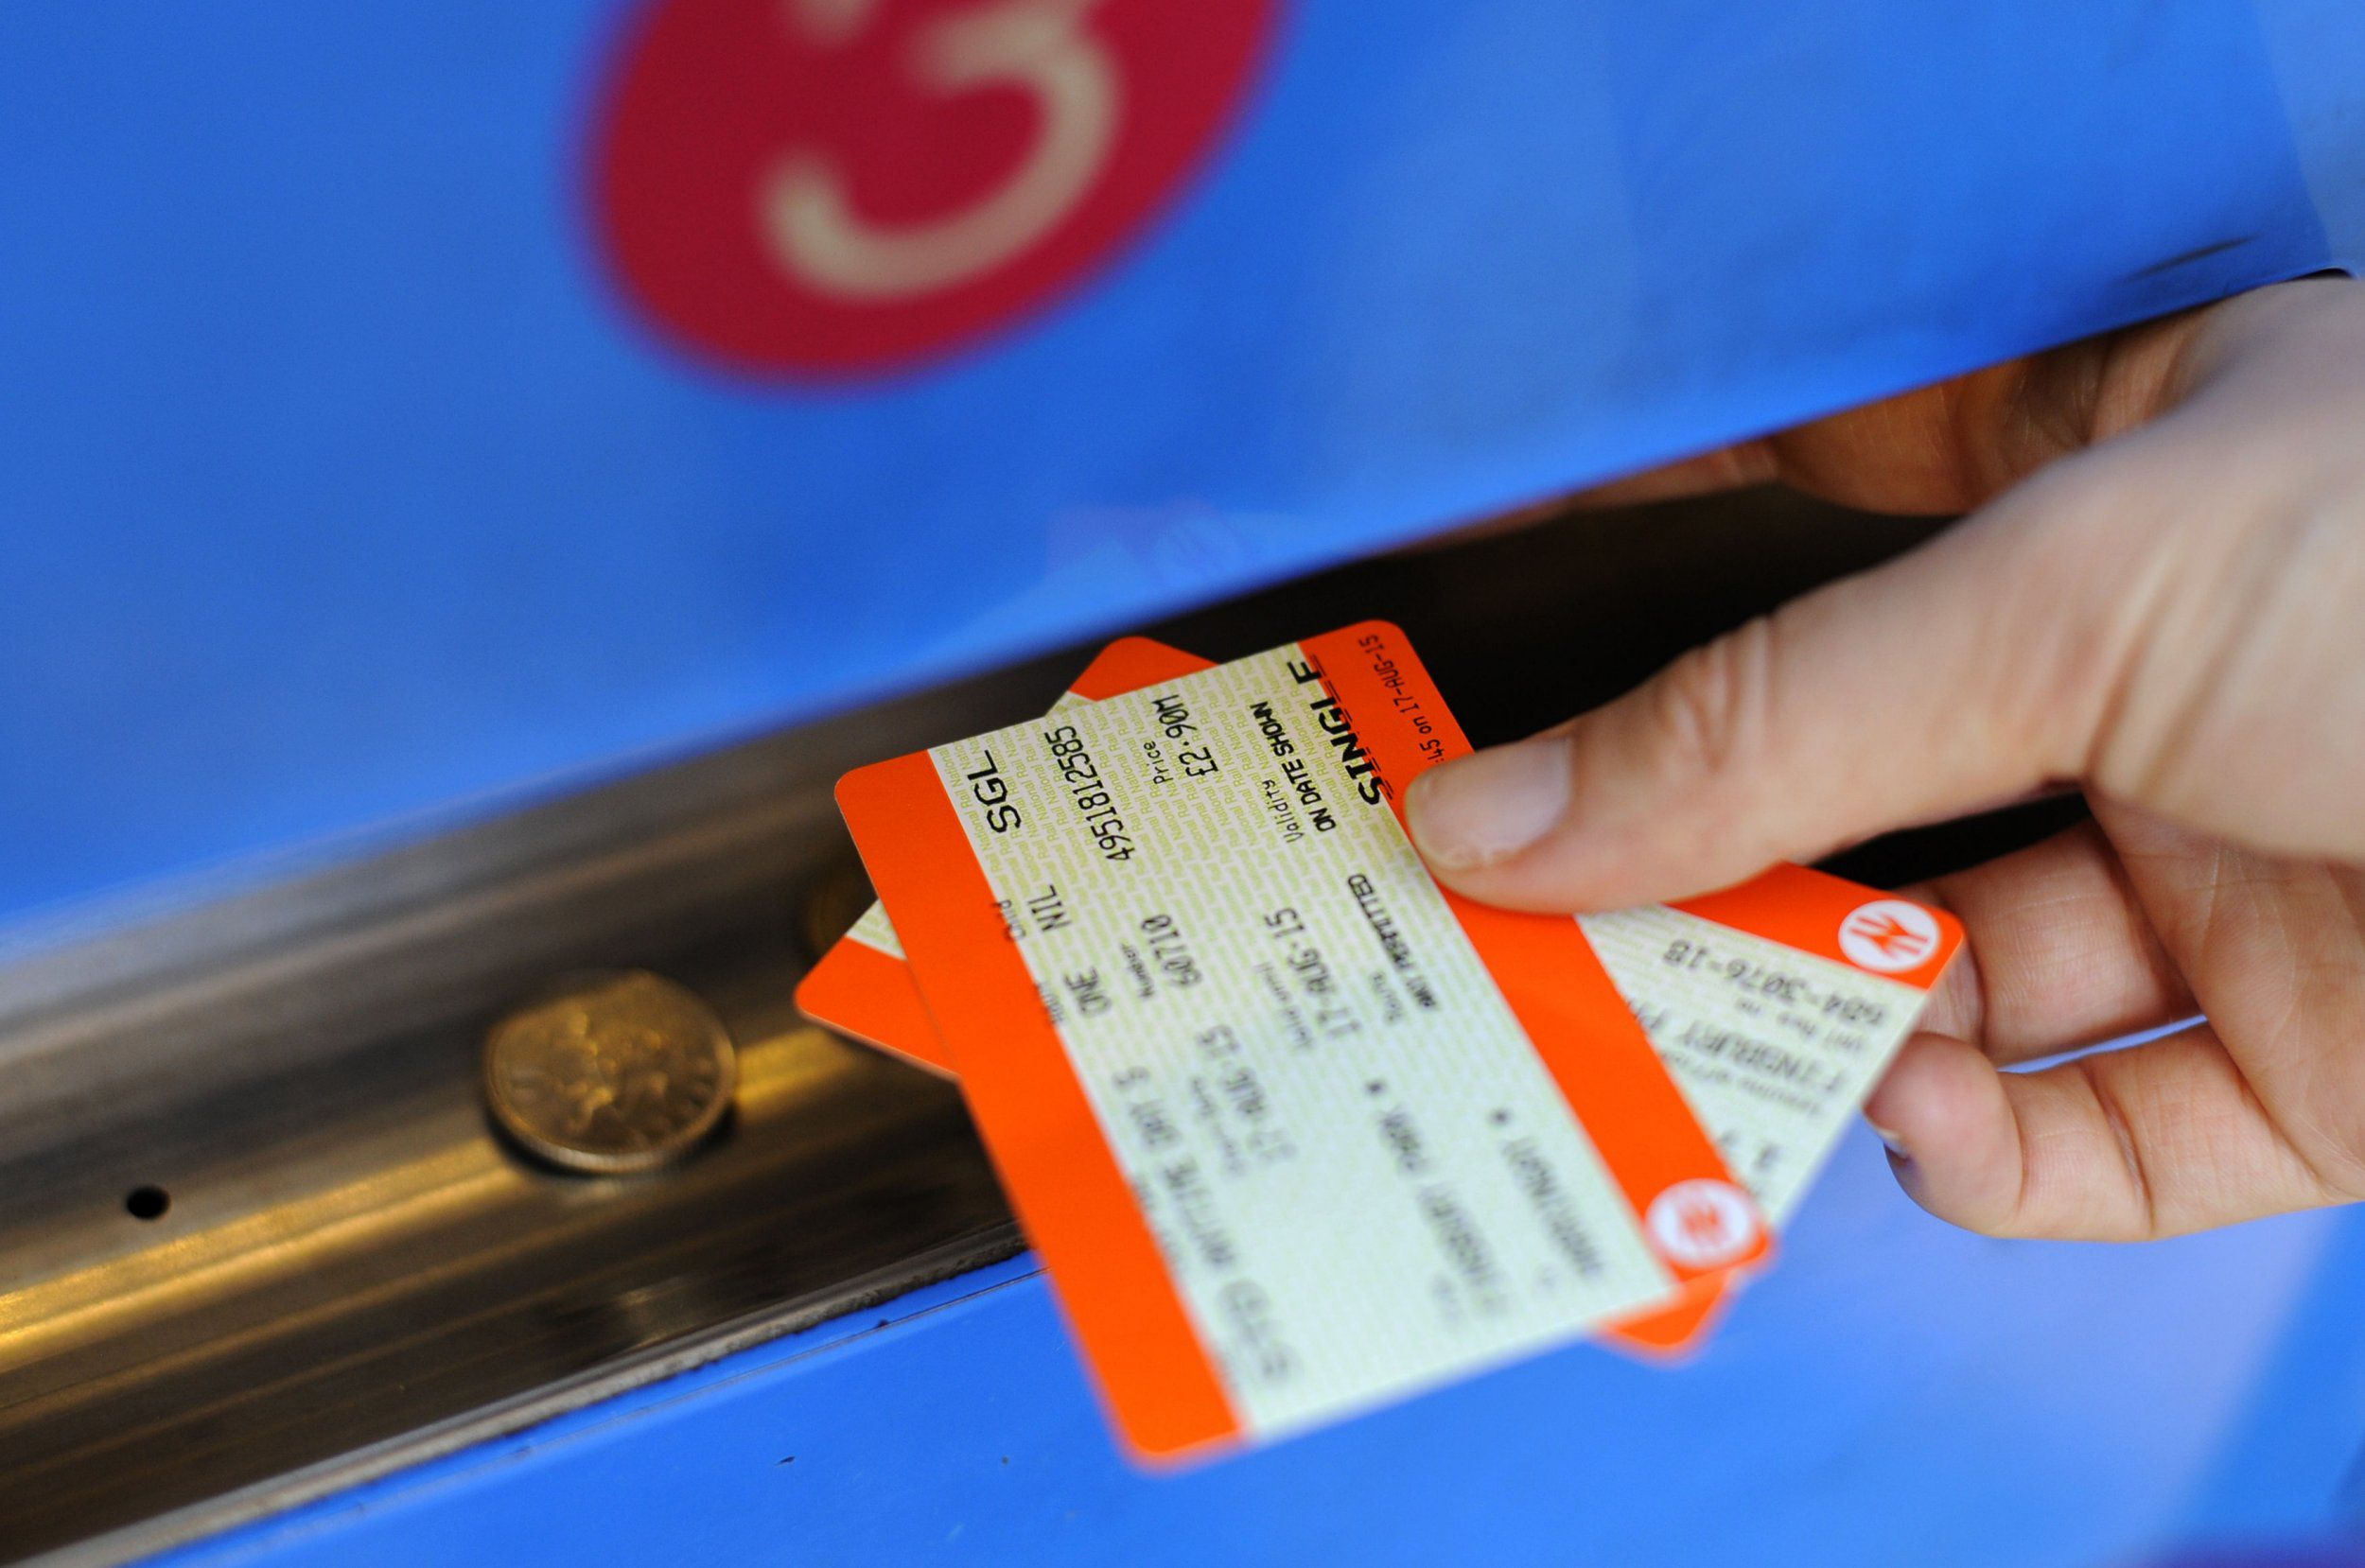 How To Find Cheaper Train Ticket Prices in England